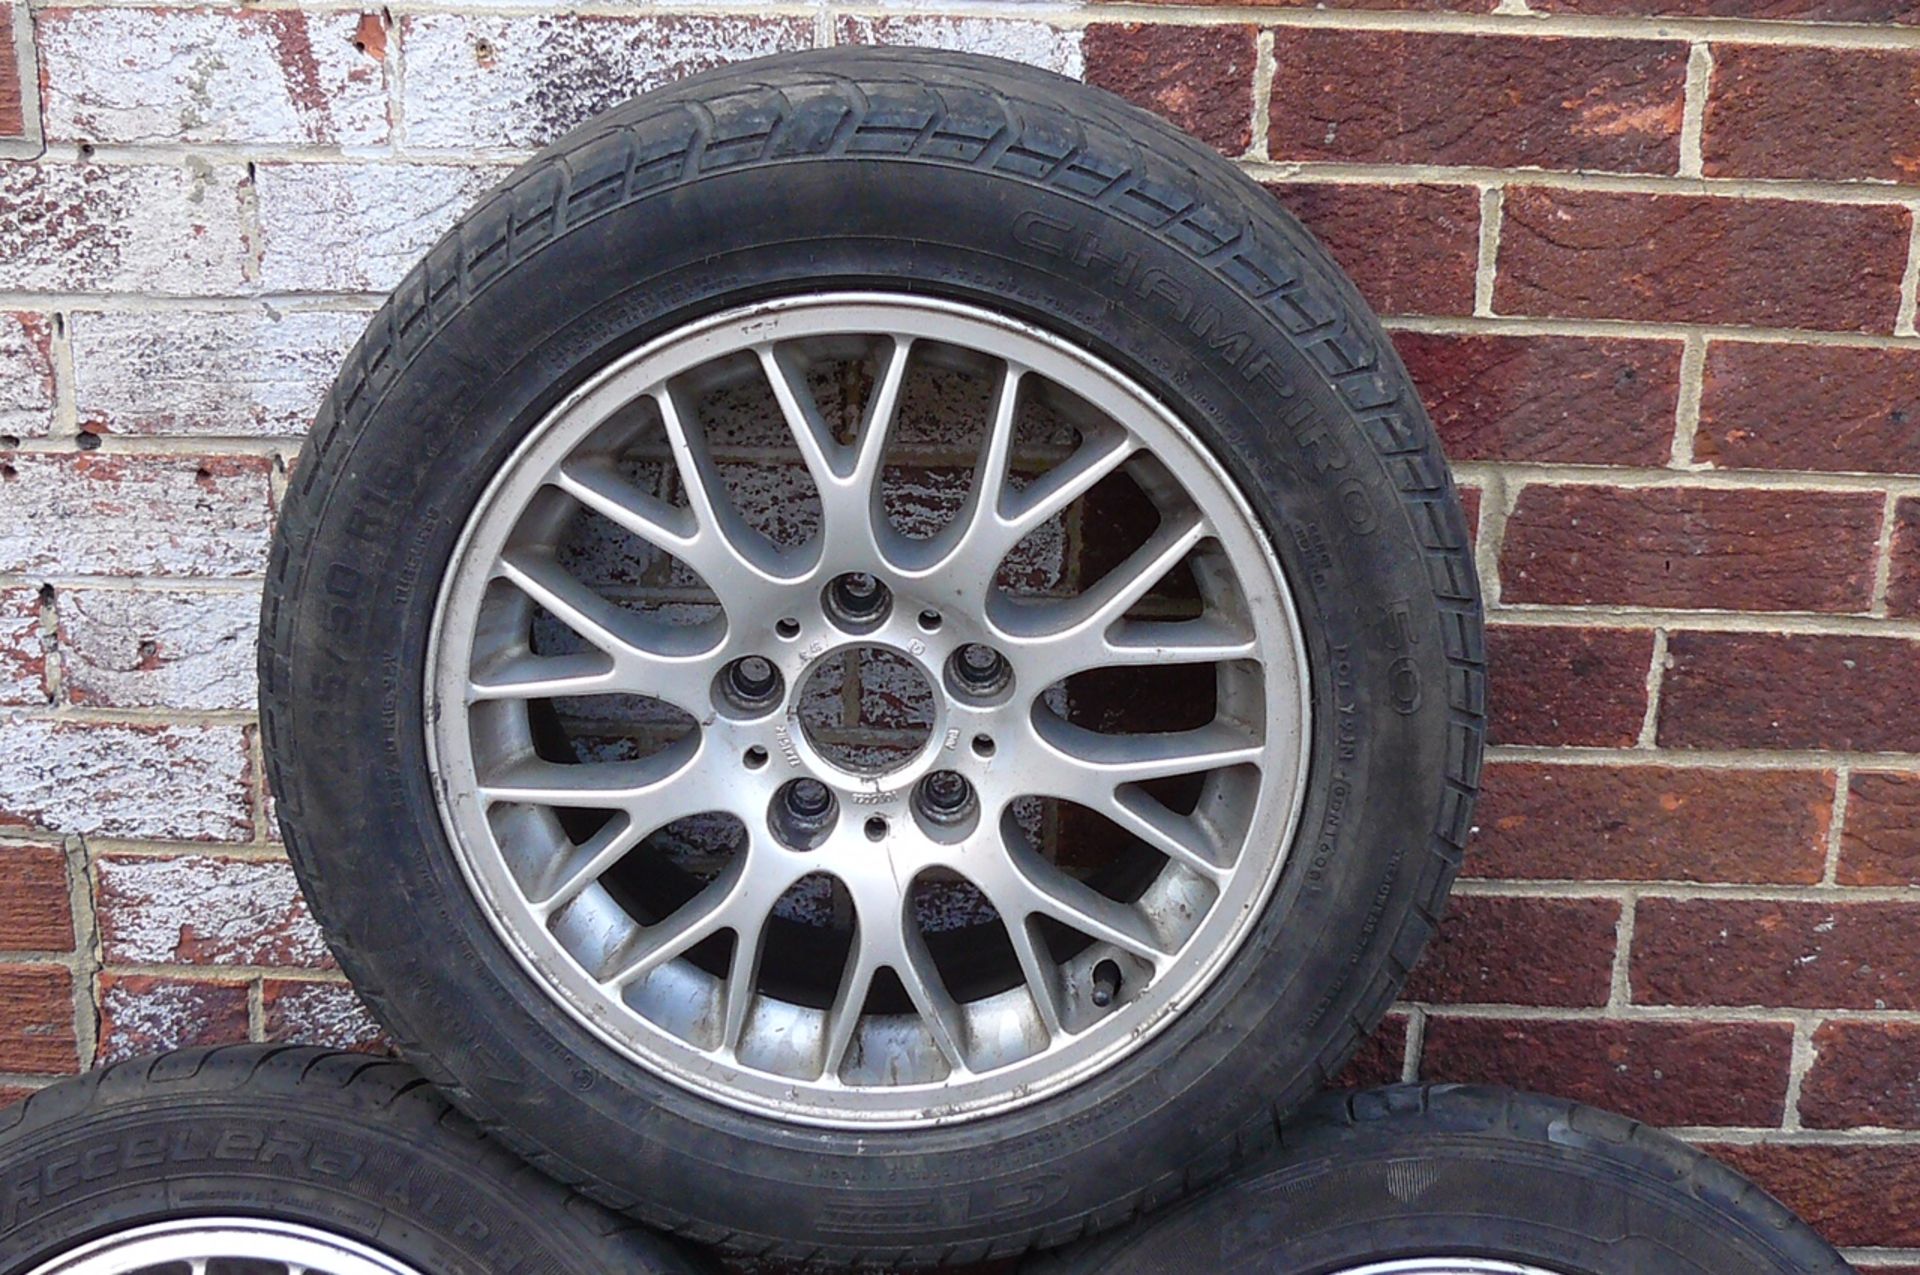 Set of 5 Wheels from BMW E46 325i - Image 3 of 3